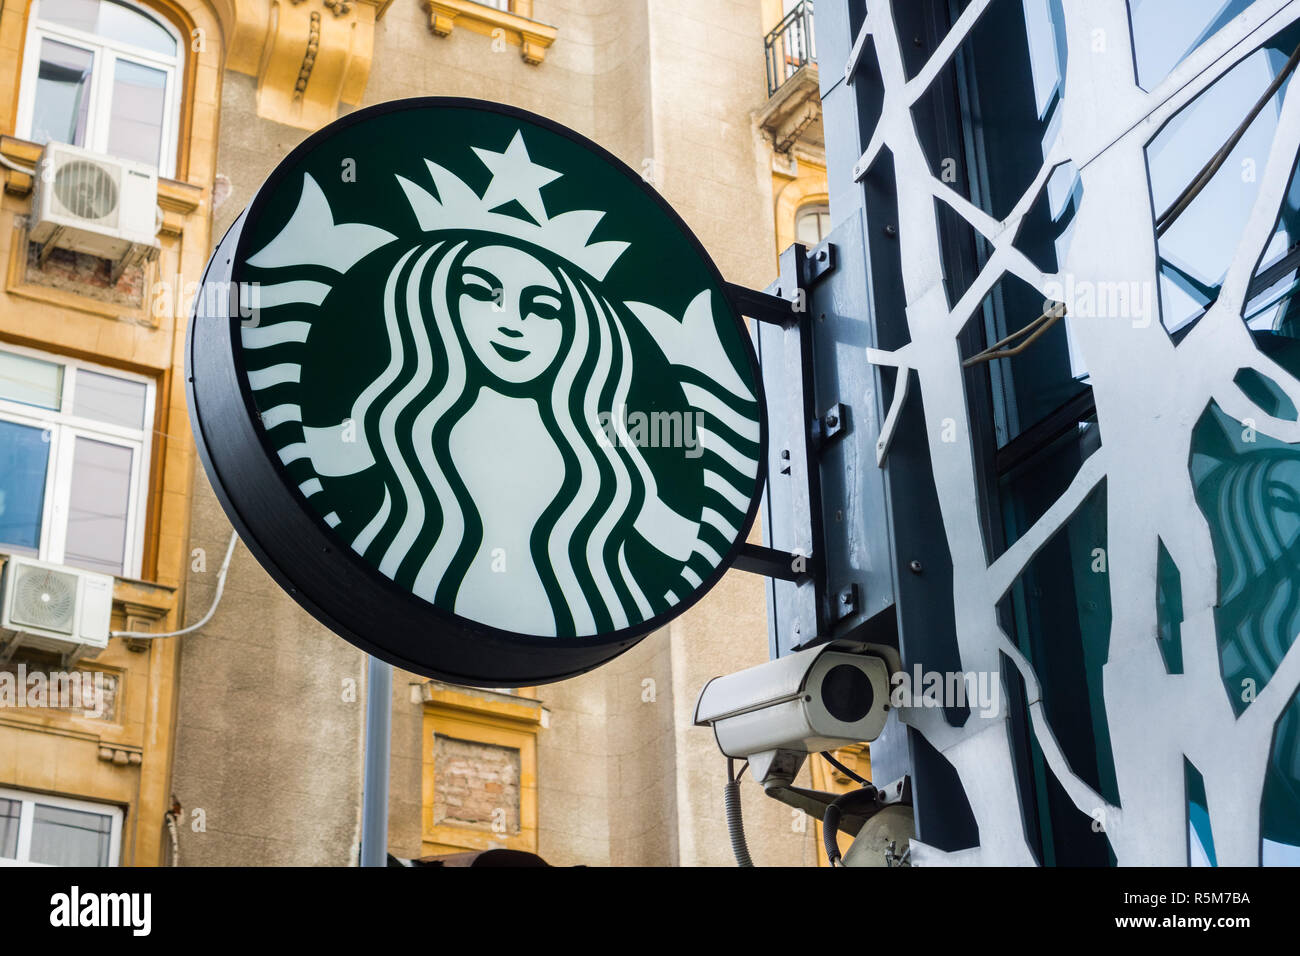 September 22, 2017 Bucharest/Romania - Starbucks logo at the entrance to a cafe located near Piata Victoriei Stock Photo